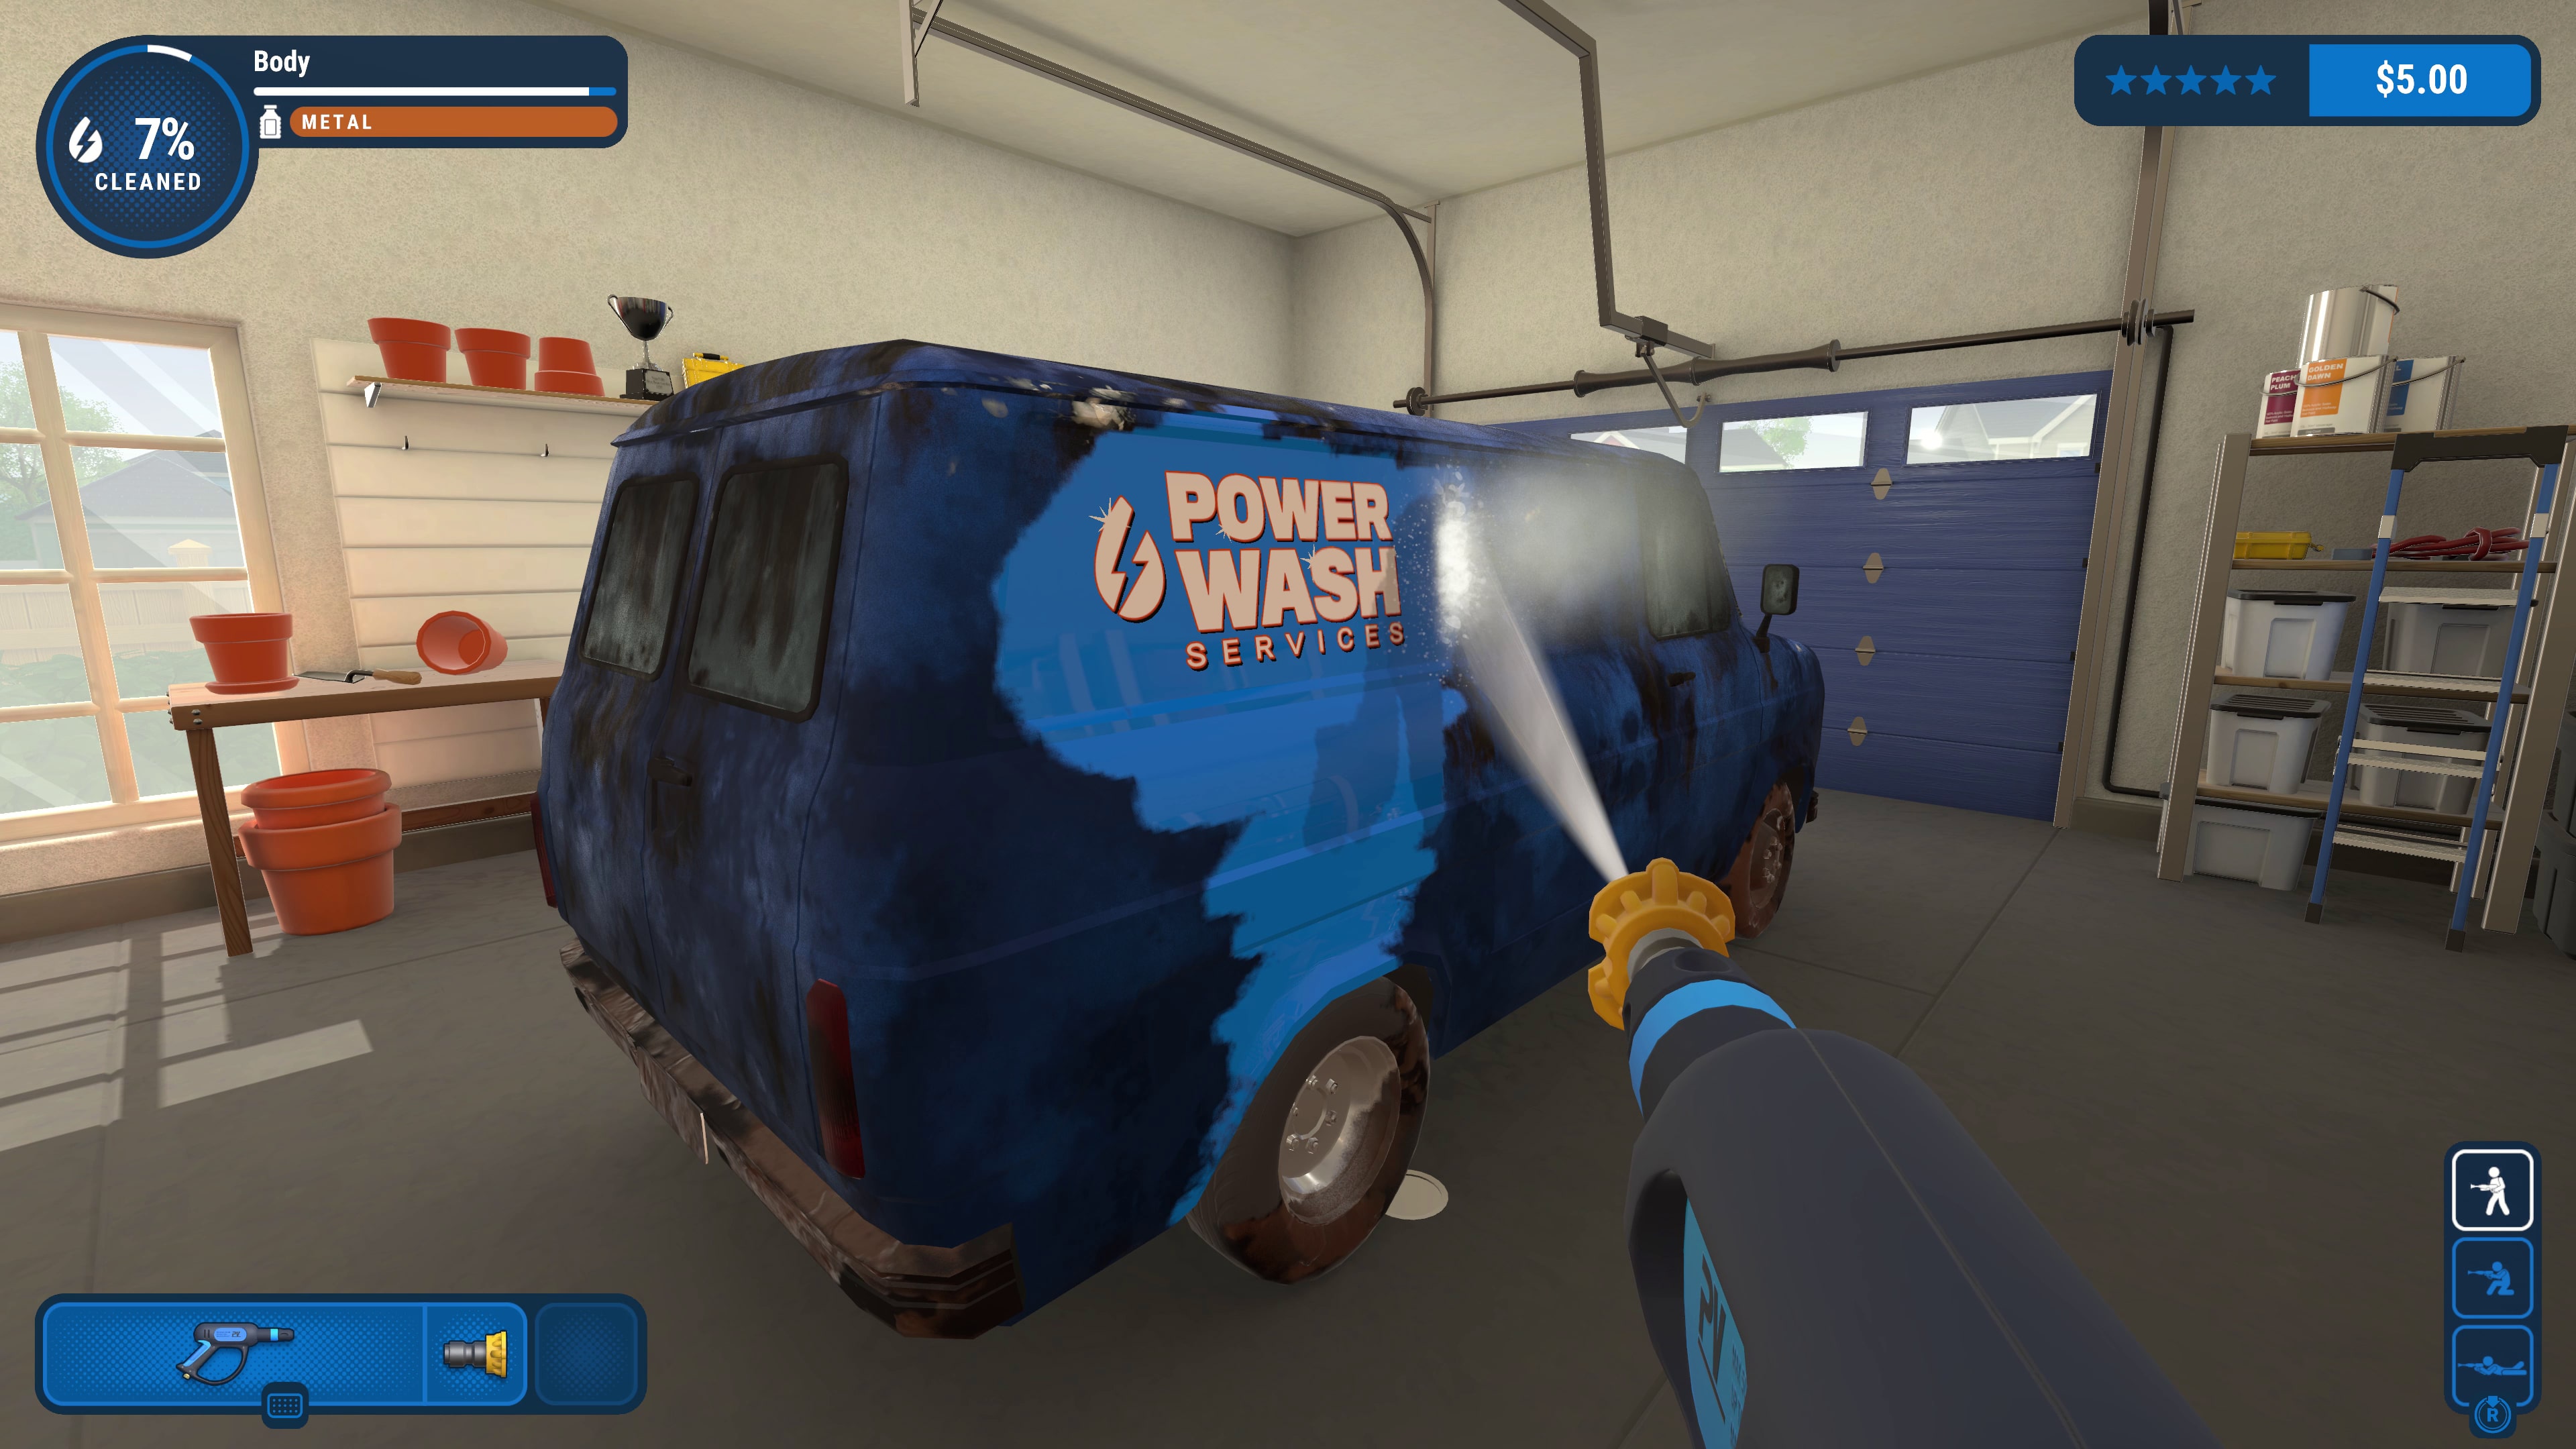 PowerWash Simulator is Making its Way to PS5 & PS4 Later This